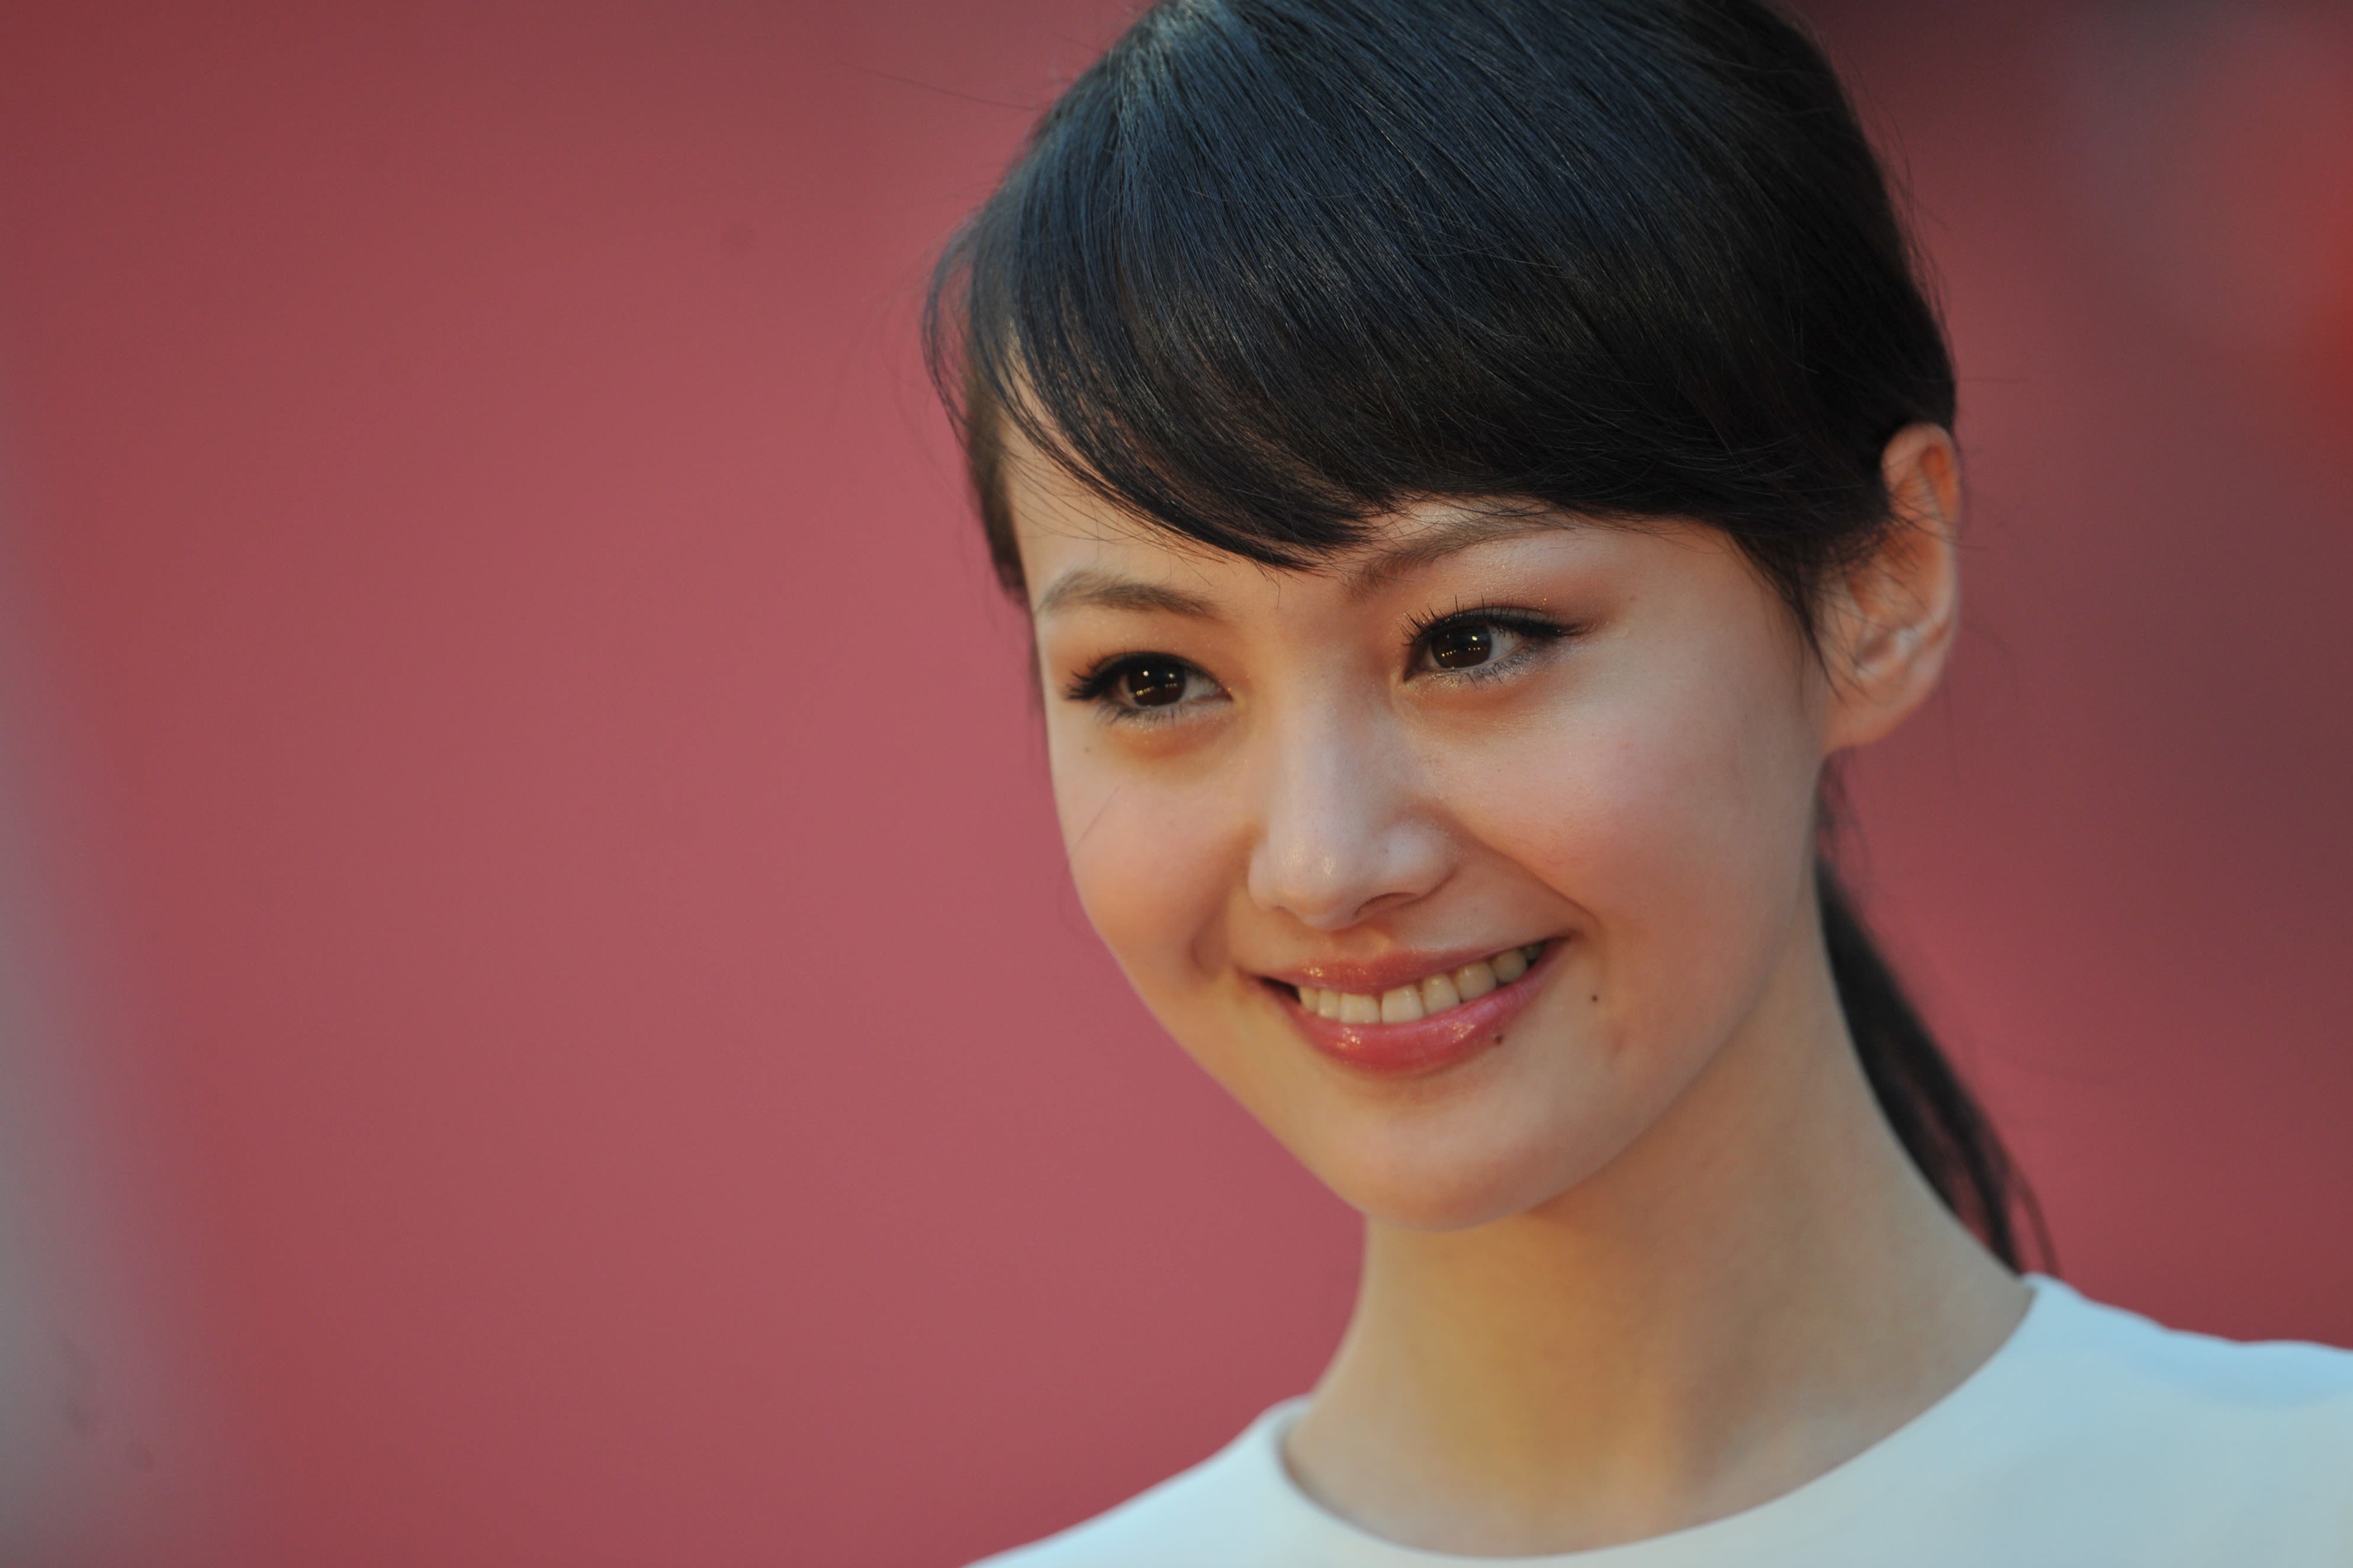 An Insider Claims Chinese Actress Zhou Dongyu Was Forced To Take On  Projects Rejected By Angelababy - TODAY